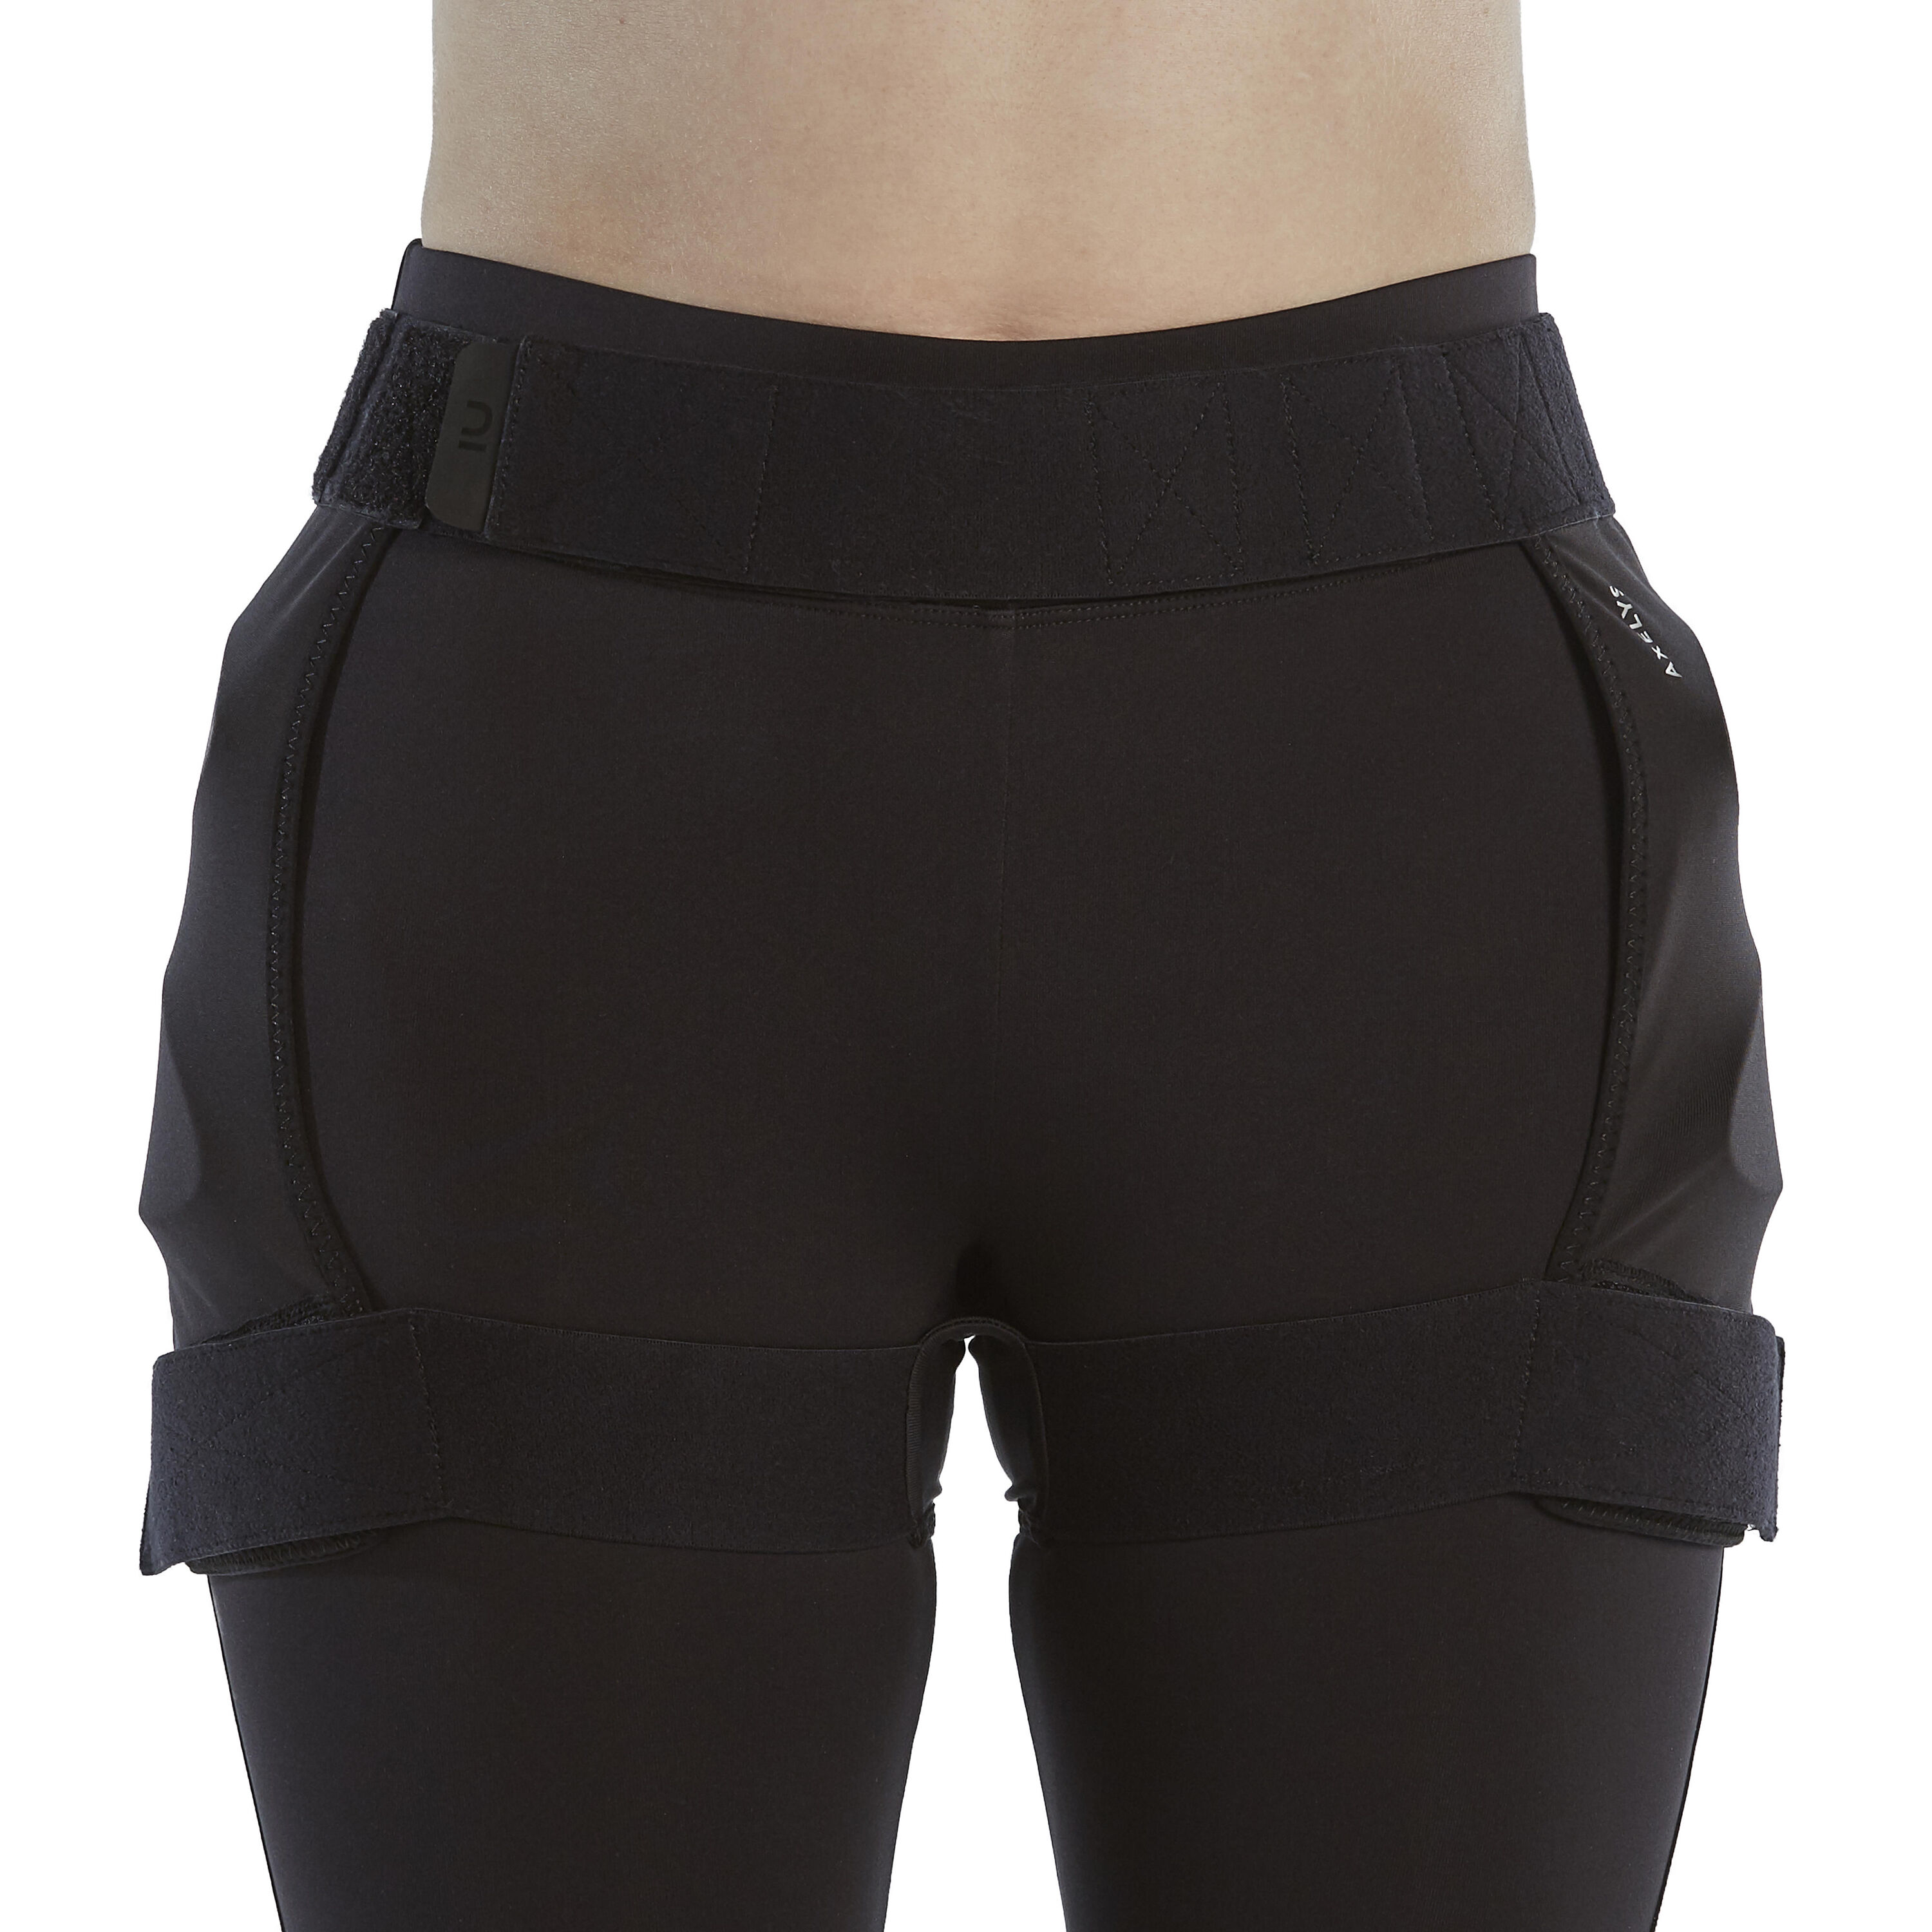 AXELYS Removable Protective Figure Skating Shorts